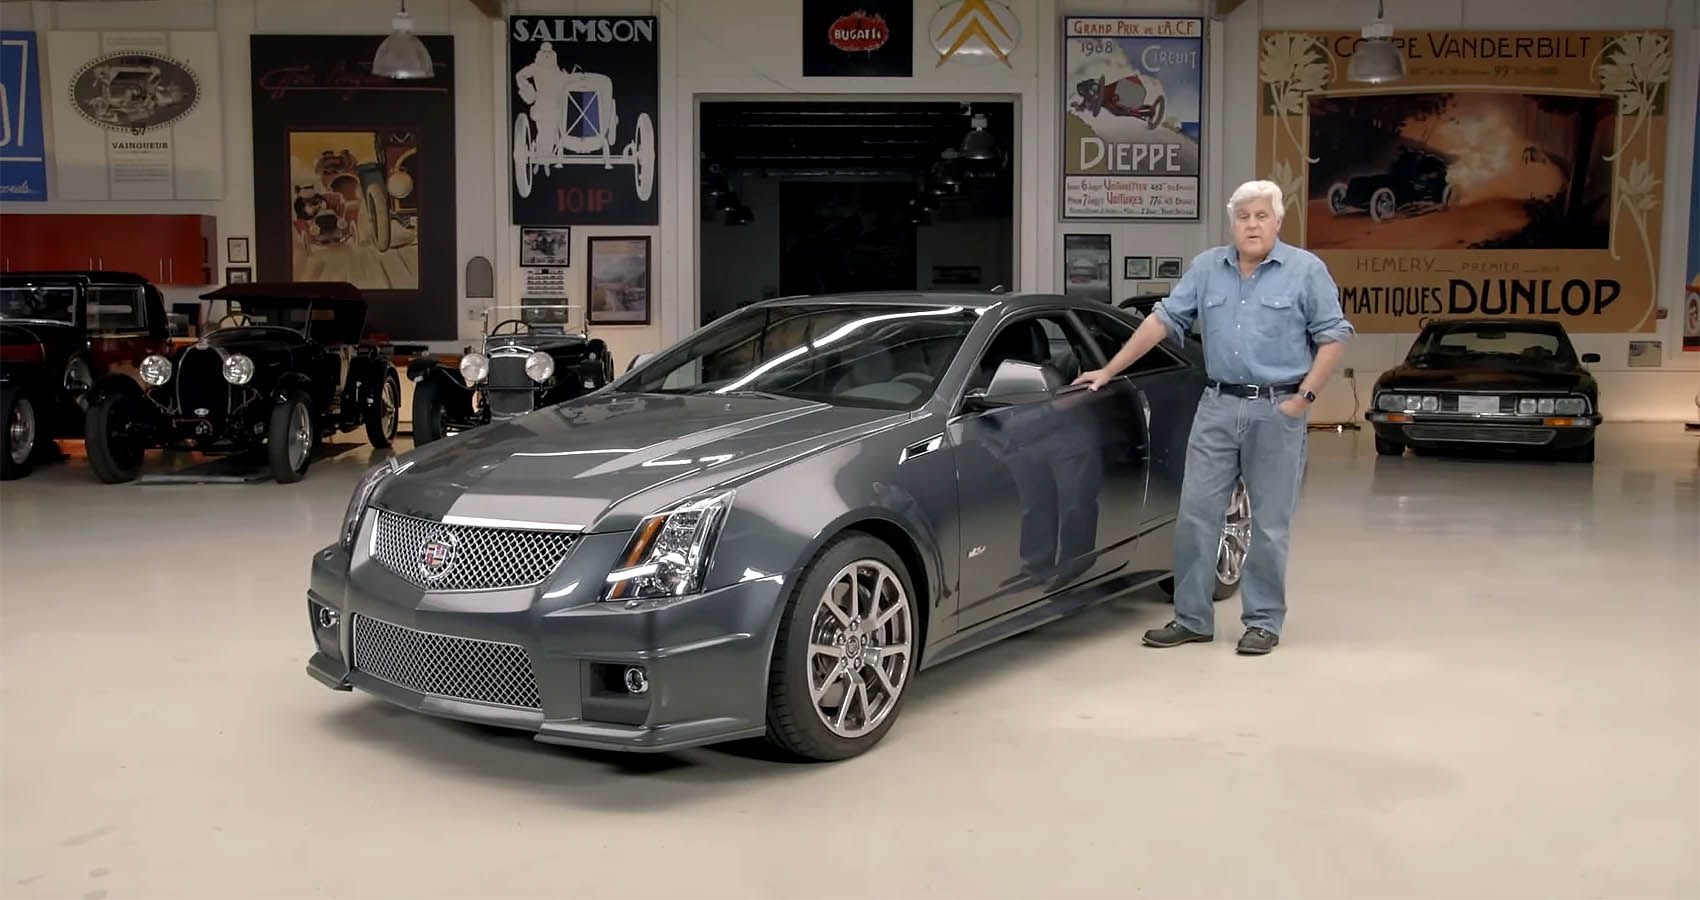 Jay Leno With His Second-Gen 2012 Cadillac CTS-V 2-Door Coupe 6 speed manual